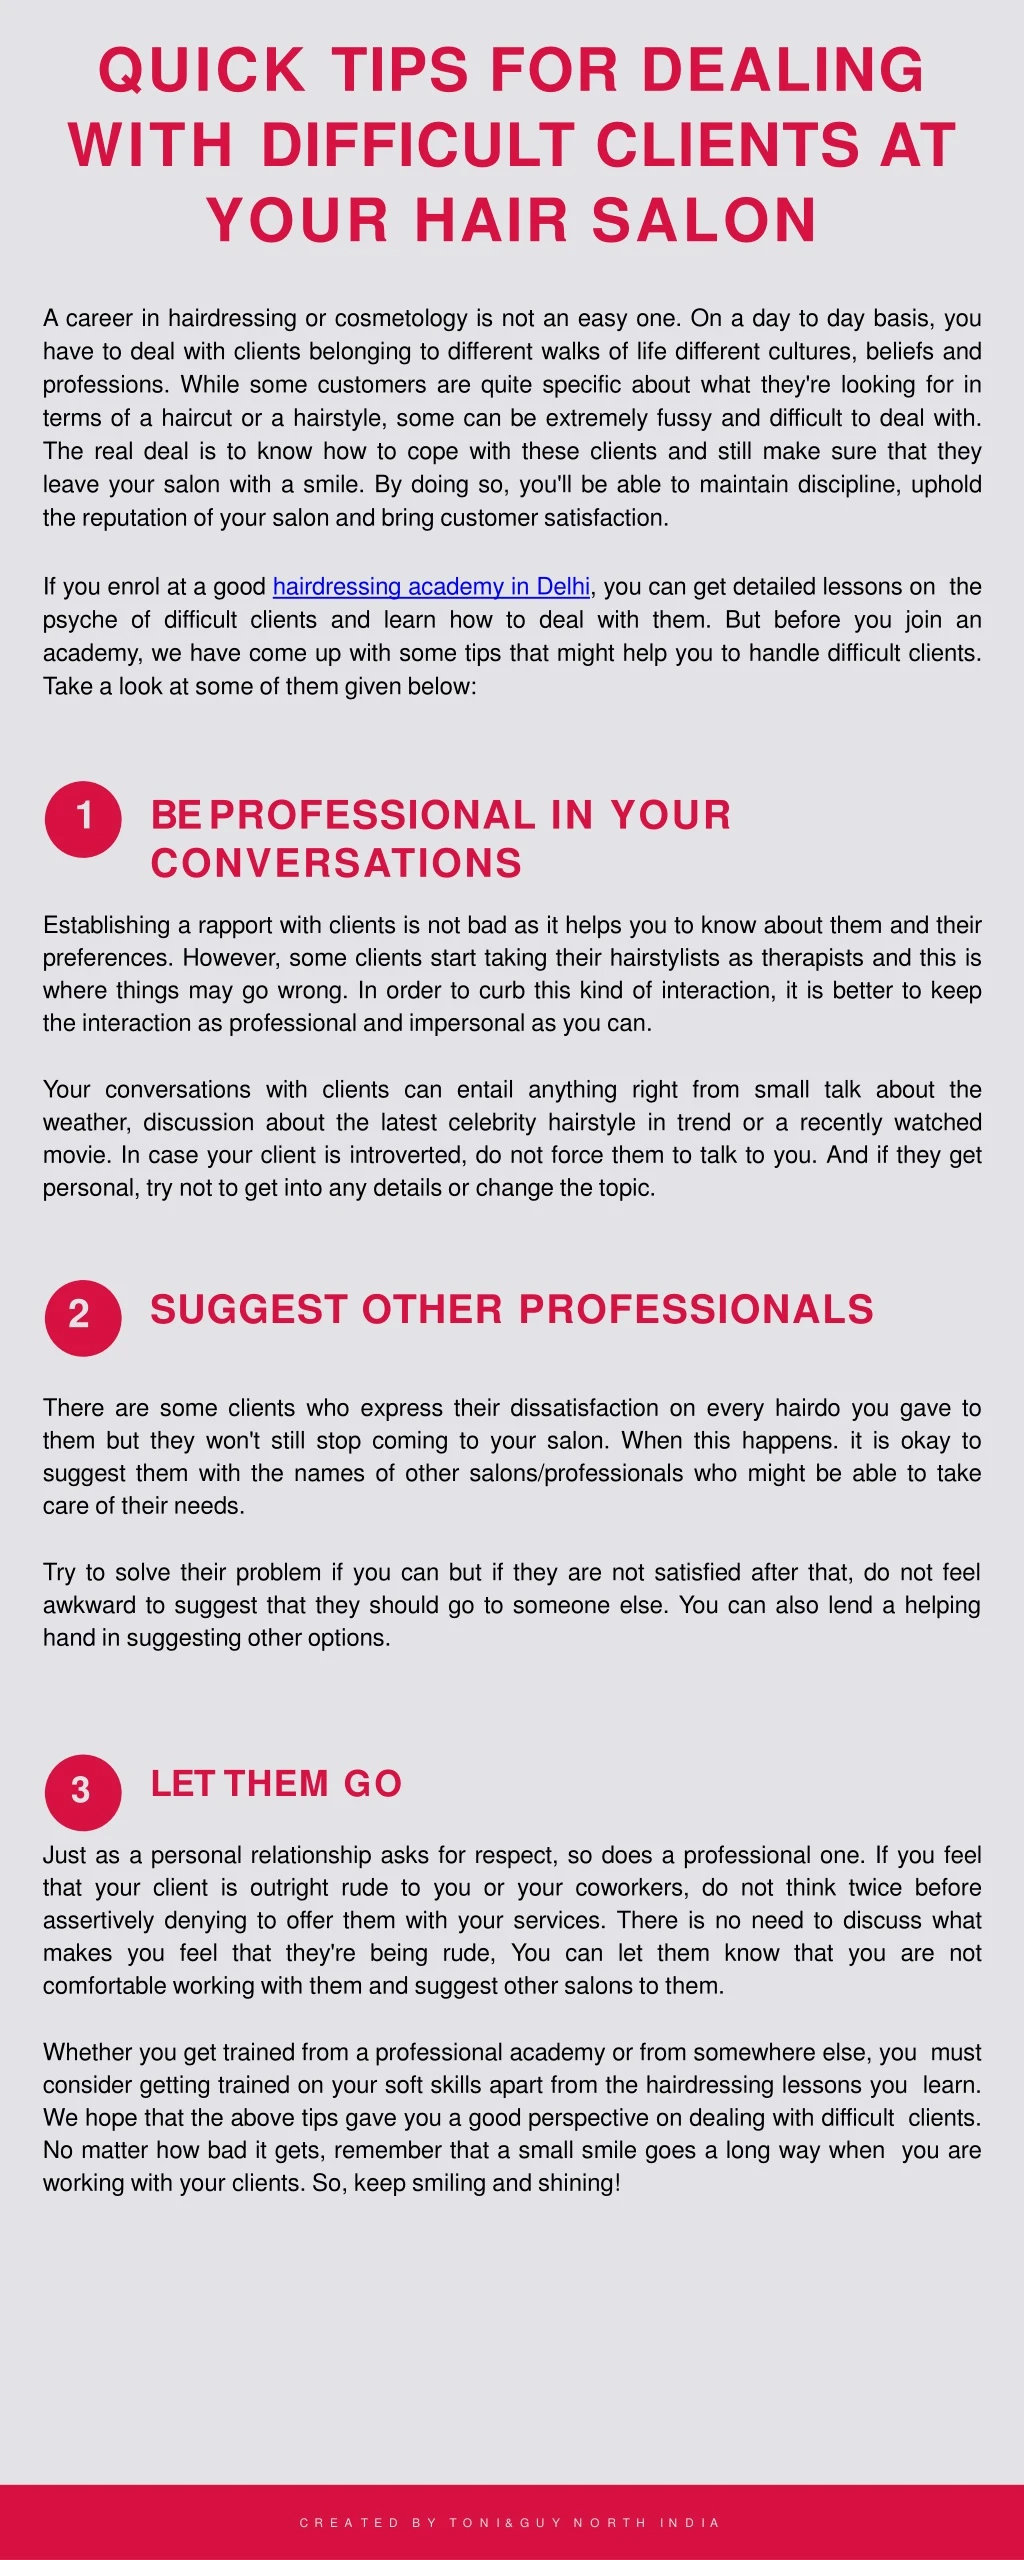 quick tips for dealing with difficult clients